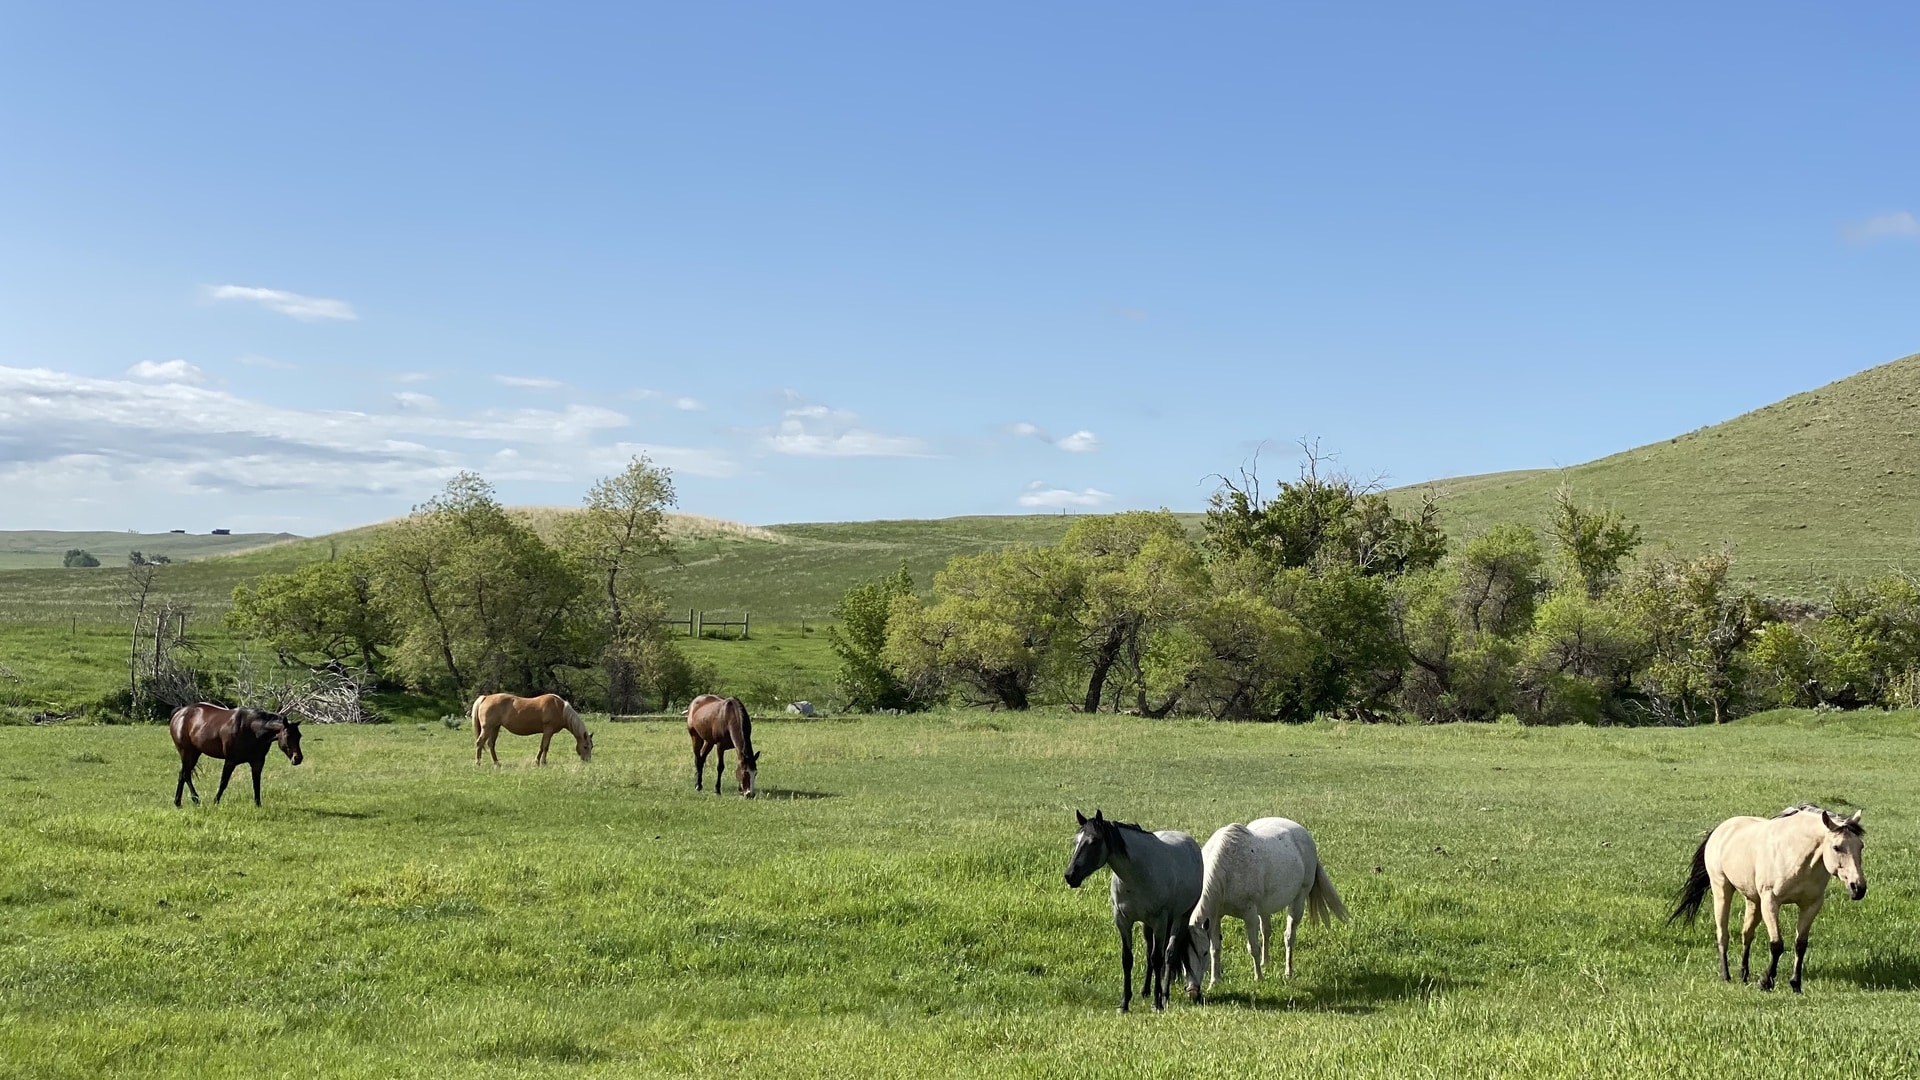 Triangle S Equestrian Ranch horses grazing